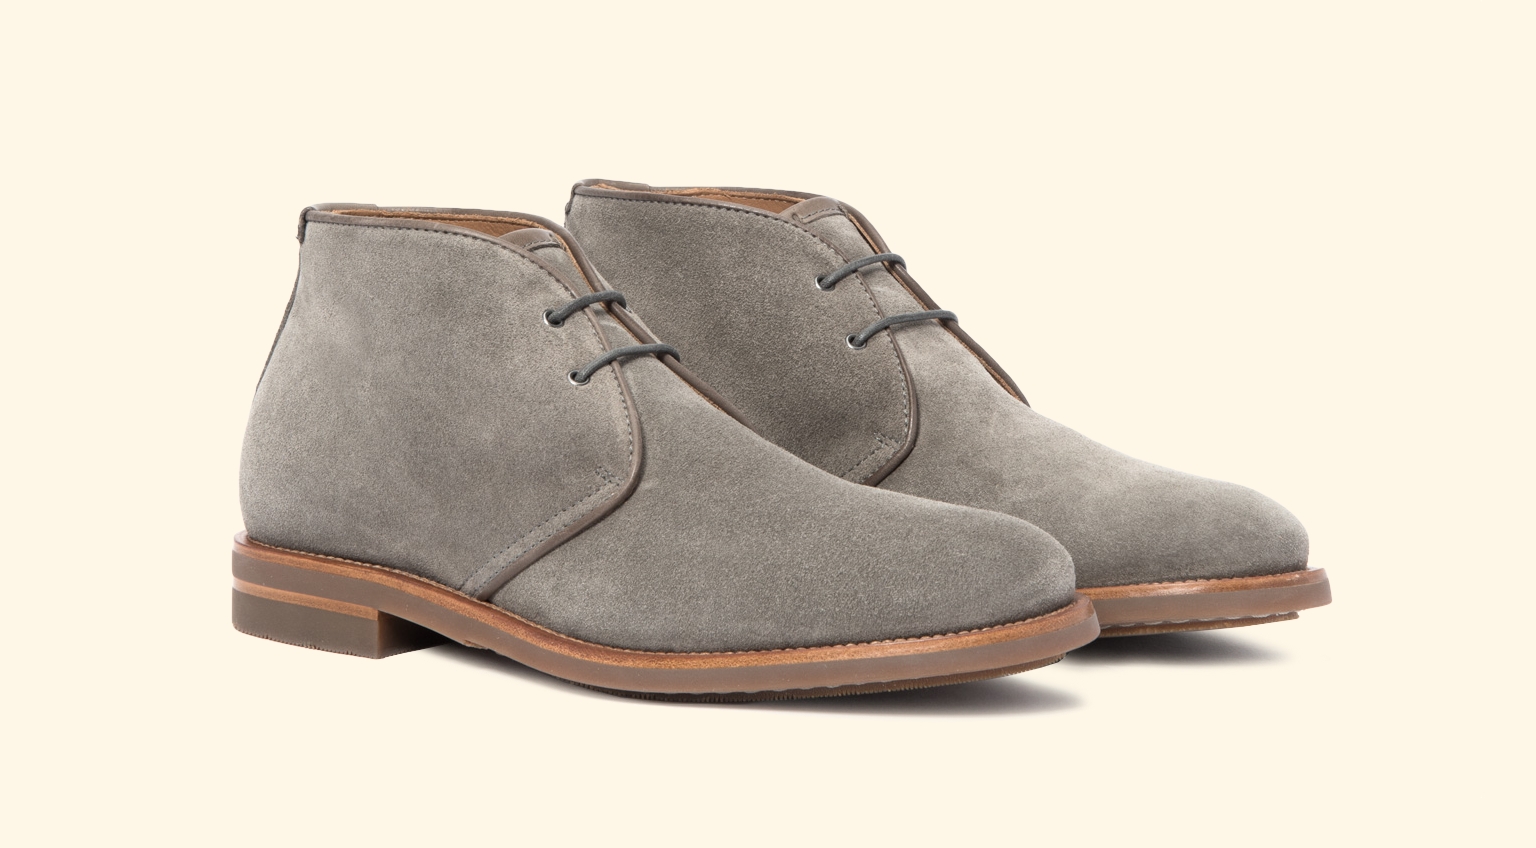 Italian-Made Shoes That Are as Durable 